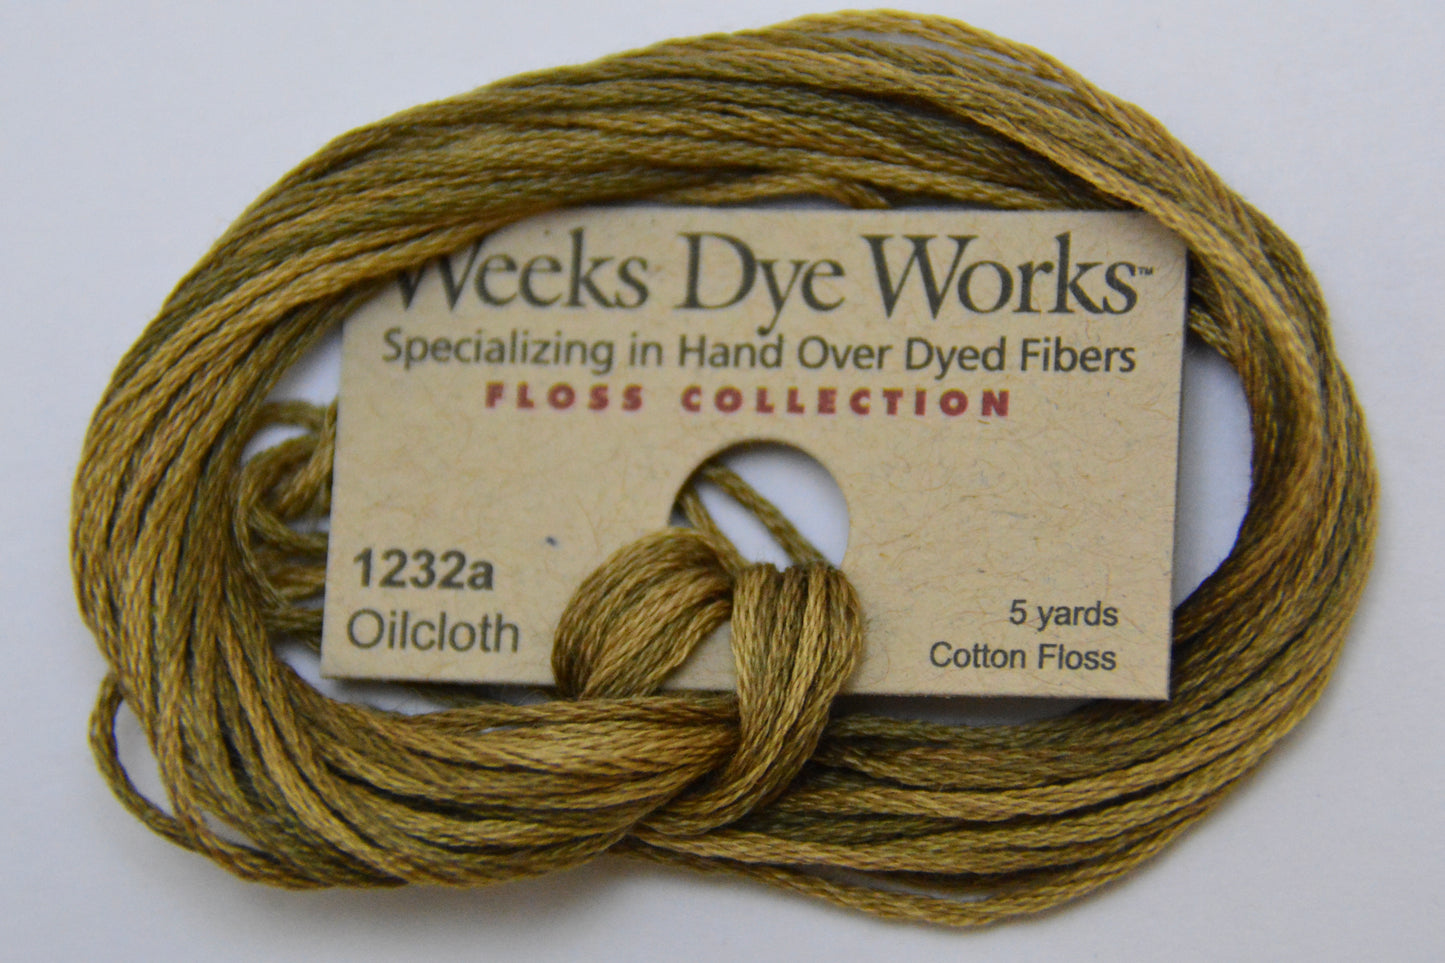 Oilcloth 1232a Weeks Dye Works 6-Strand Hand-Dyed Embroidery Floss